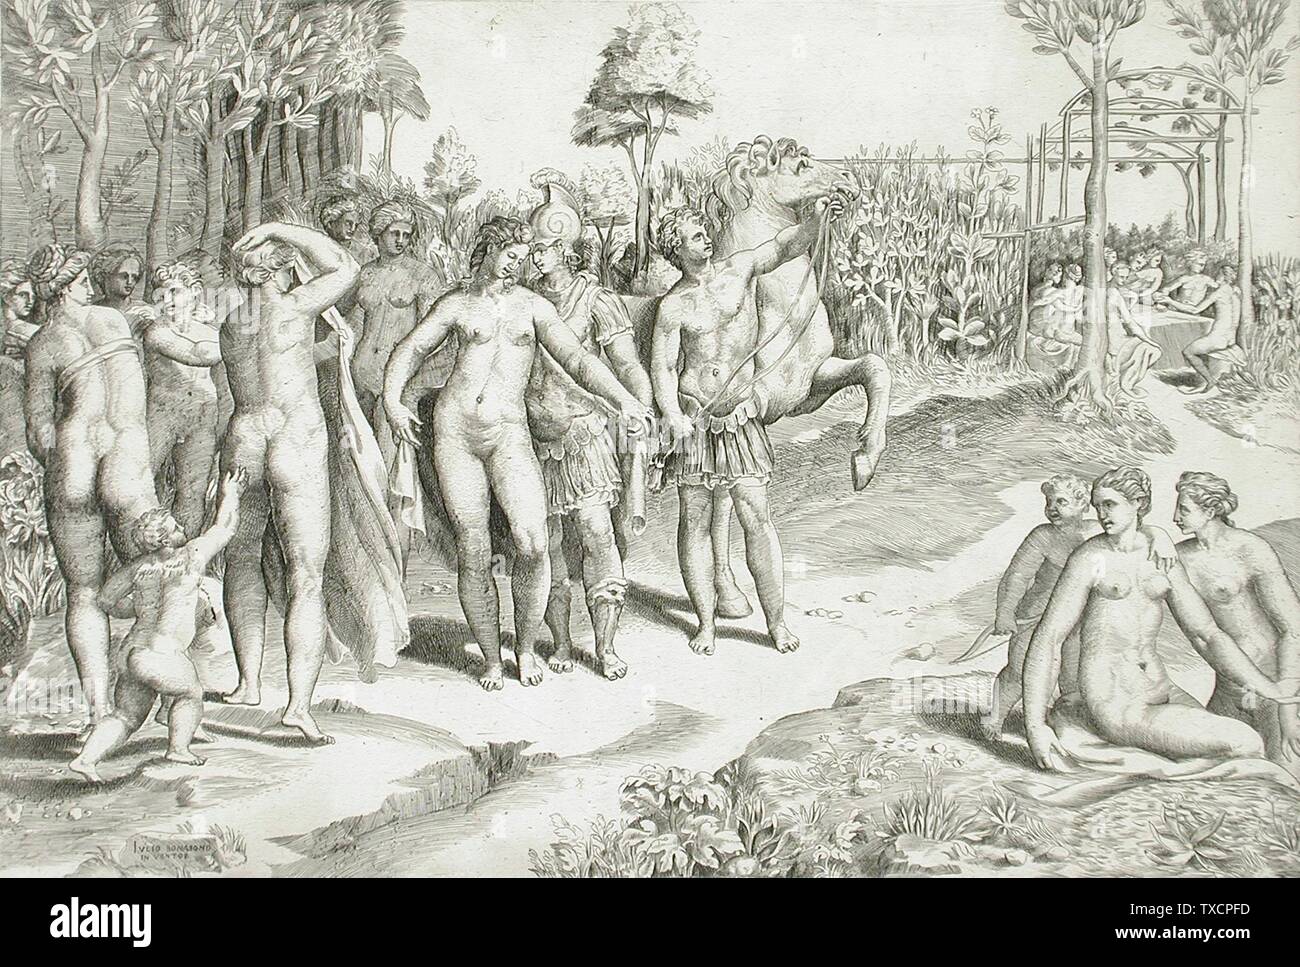 Ruggero in the Garden of Alcina;  Italy, circa 1545 Prints; engravings Engraving Sheet: 13 1/2 x 19 1/8 in. (34.29 x 48.58 cm); image: 9 1/4 x 13 1/2 in. (23.5 x 34.29 cm) Mary Stansbury Ruiz Bequest (M.88.91.232) Prints and Drawings; circa 1545 date QS:P571,+1545-00-00T00:00:00Z/9,P1480,Q5727902; Stock Photo